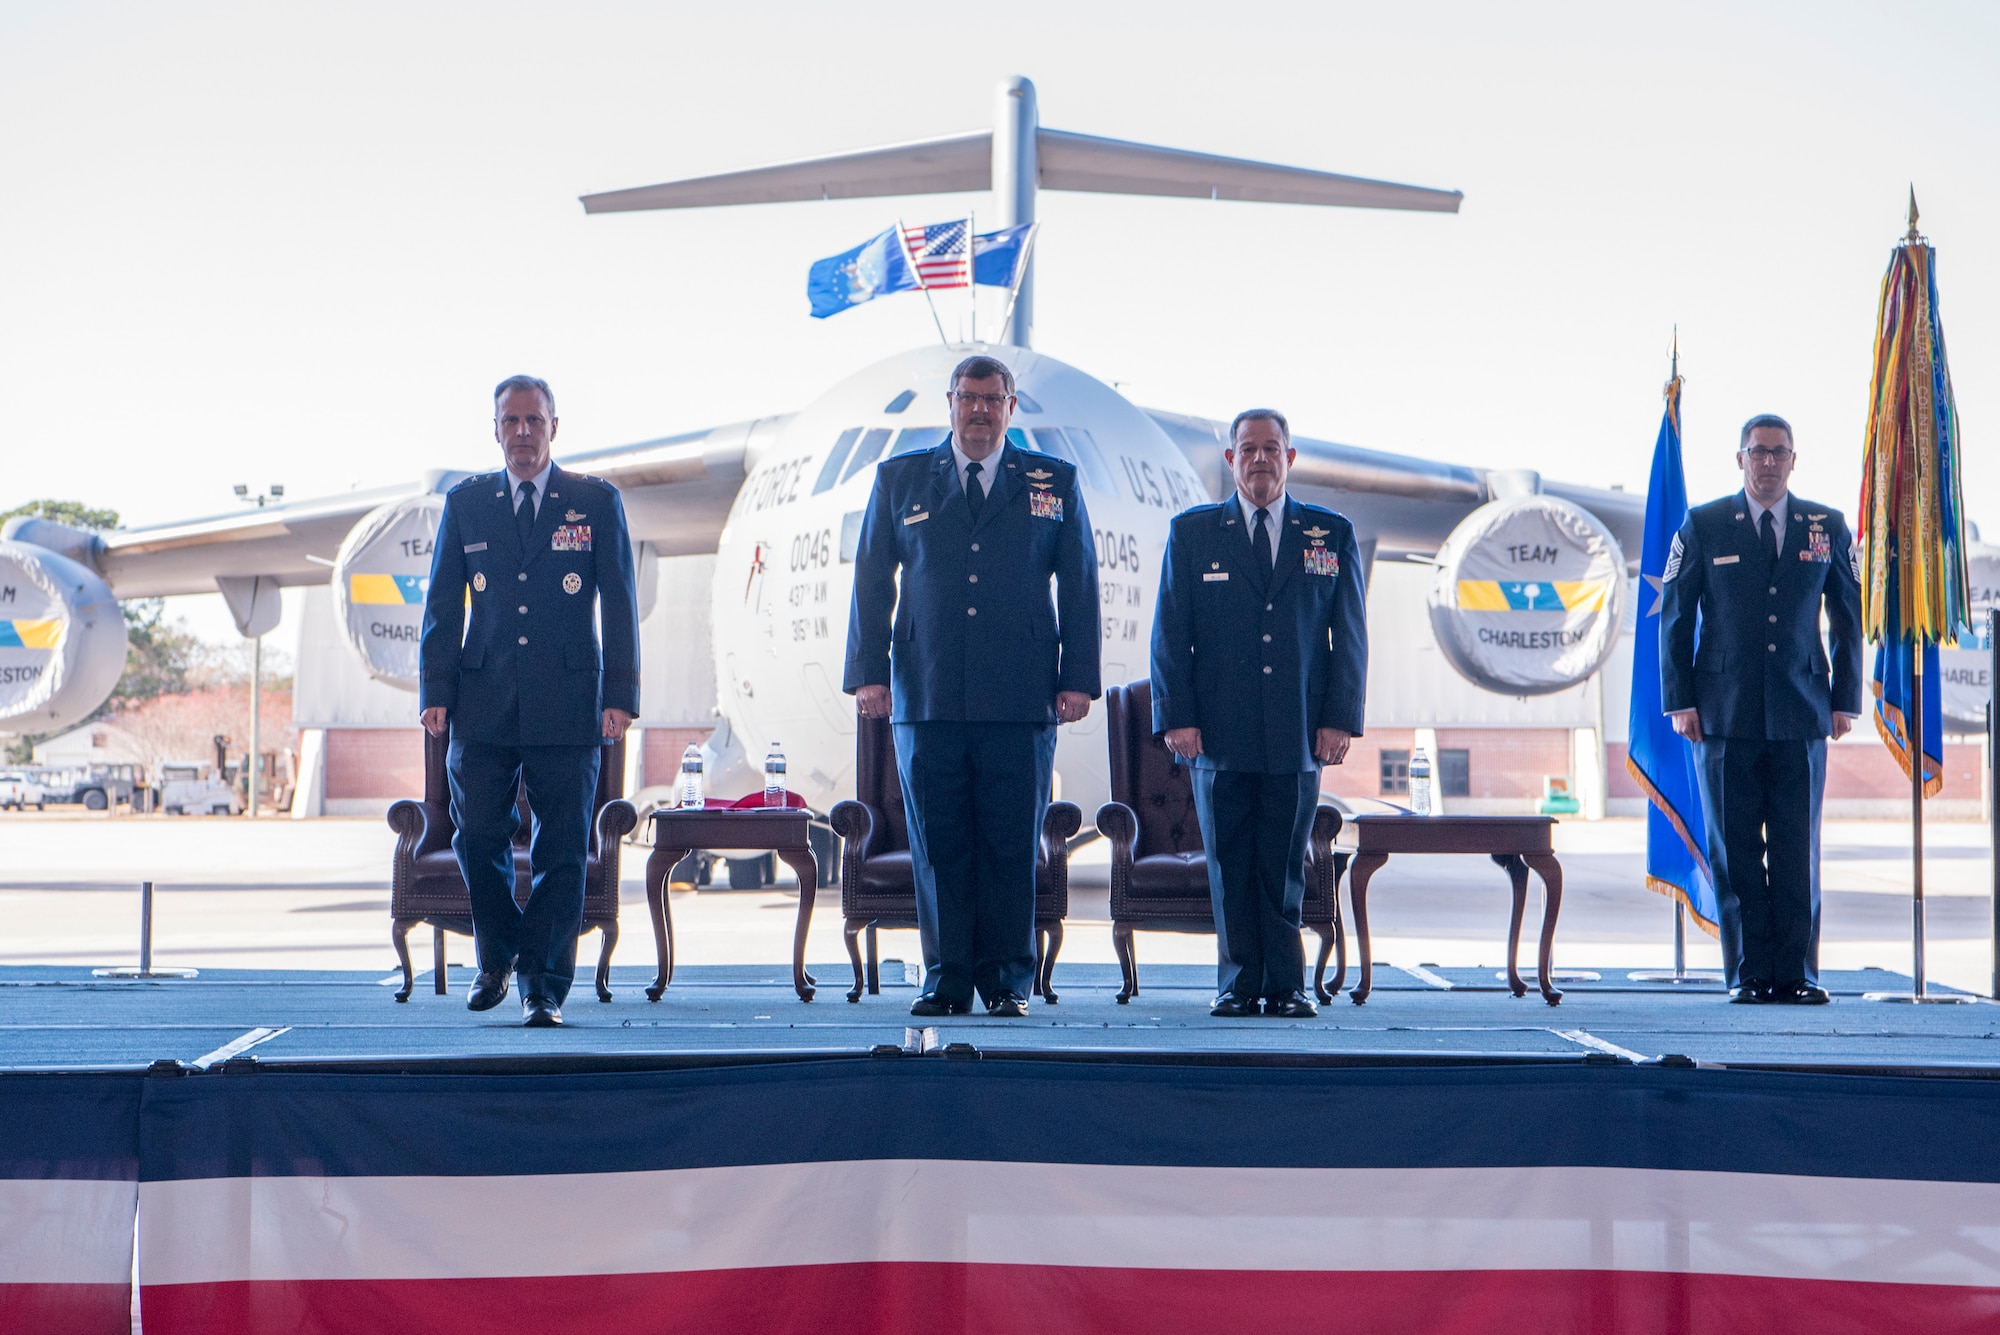 Maj. Gen. Randall Ogden, left, U.S. Air Force 4th Air Force Commander, Col. Gregory Gilmour, second to the left, outgoing 315th Airlift Wing Commander, Col. Adam Willis,third to the left, incoming 315th Airlift Wing commander, and Chief Master Sgt. John-Paul Burke, Command Chief Master Sergeant of the 315th Airlift Wing, stand for the begining of a change of command ceremony at Nose Dock 2 here, Dec. 7. Willis replaced Col. Gregory Gilmour, as the 315th Airlift Wing commander